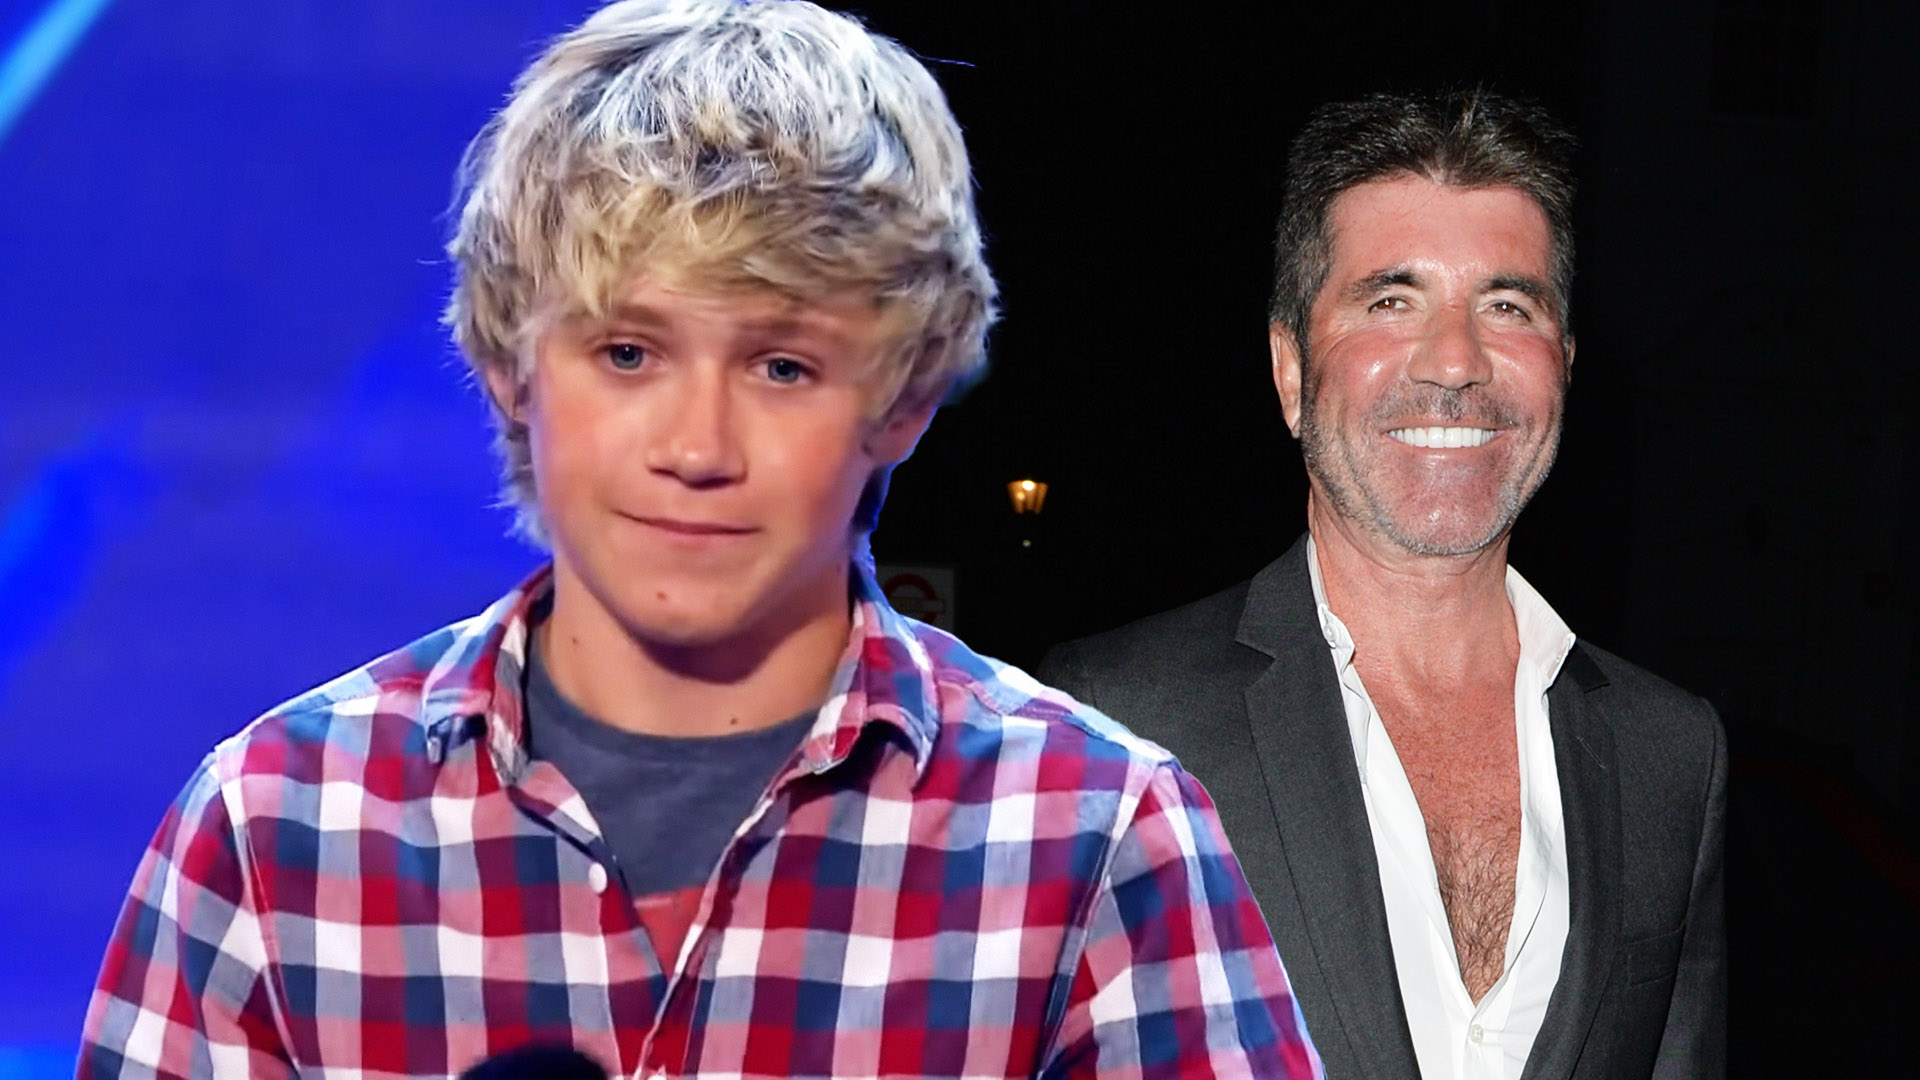 Would Niall Horan Have Failed X Factor Audition Without Simon Cowell?